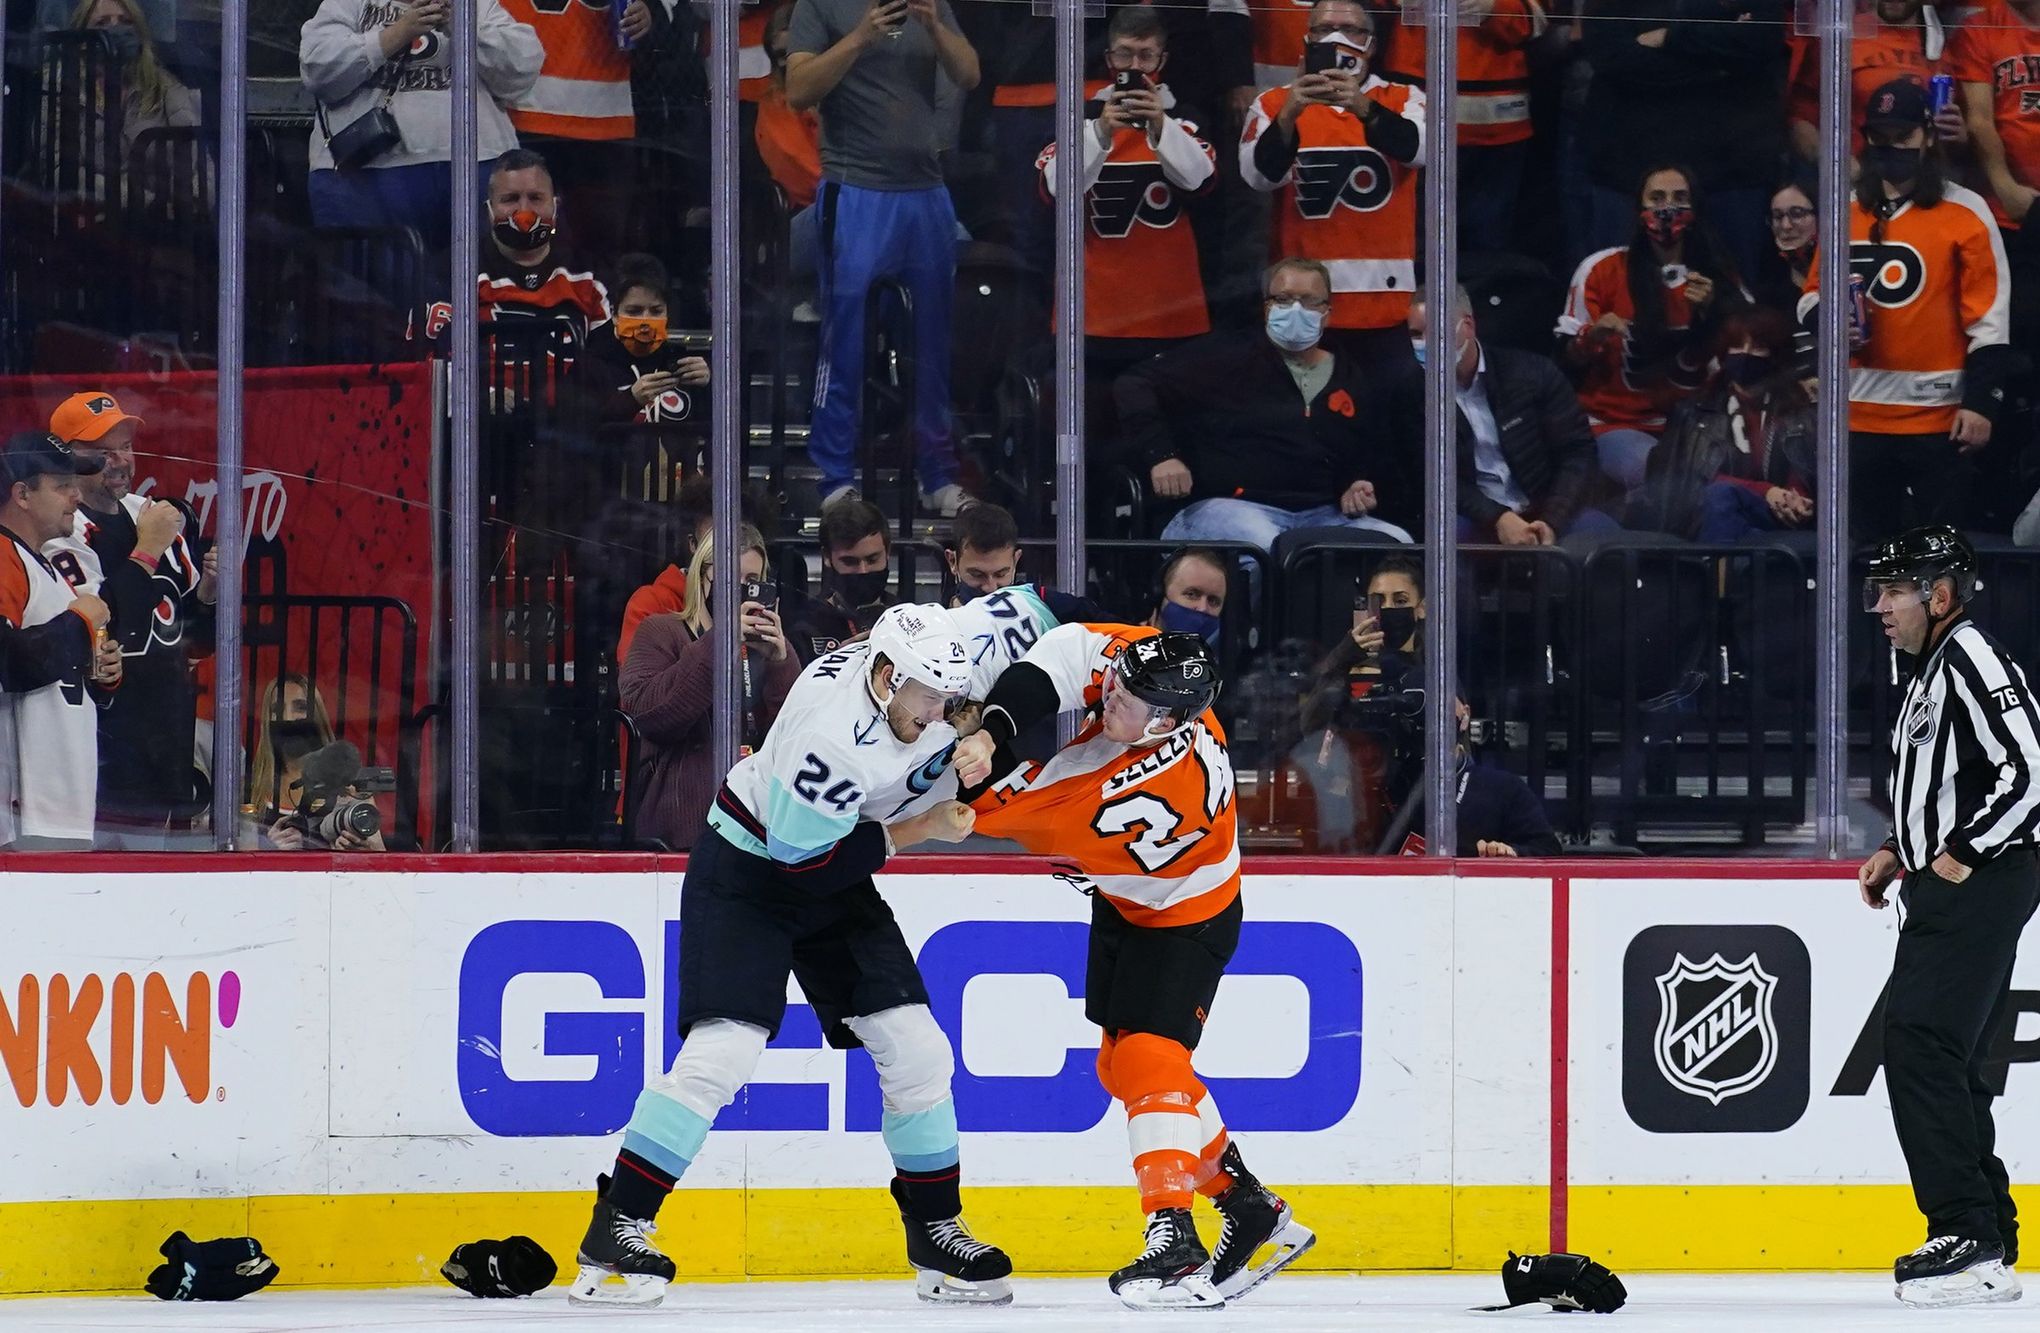 Where are yesterday's Broad Street Bullies?